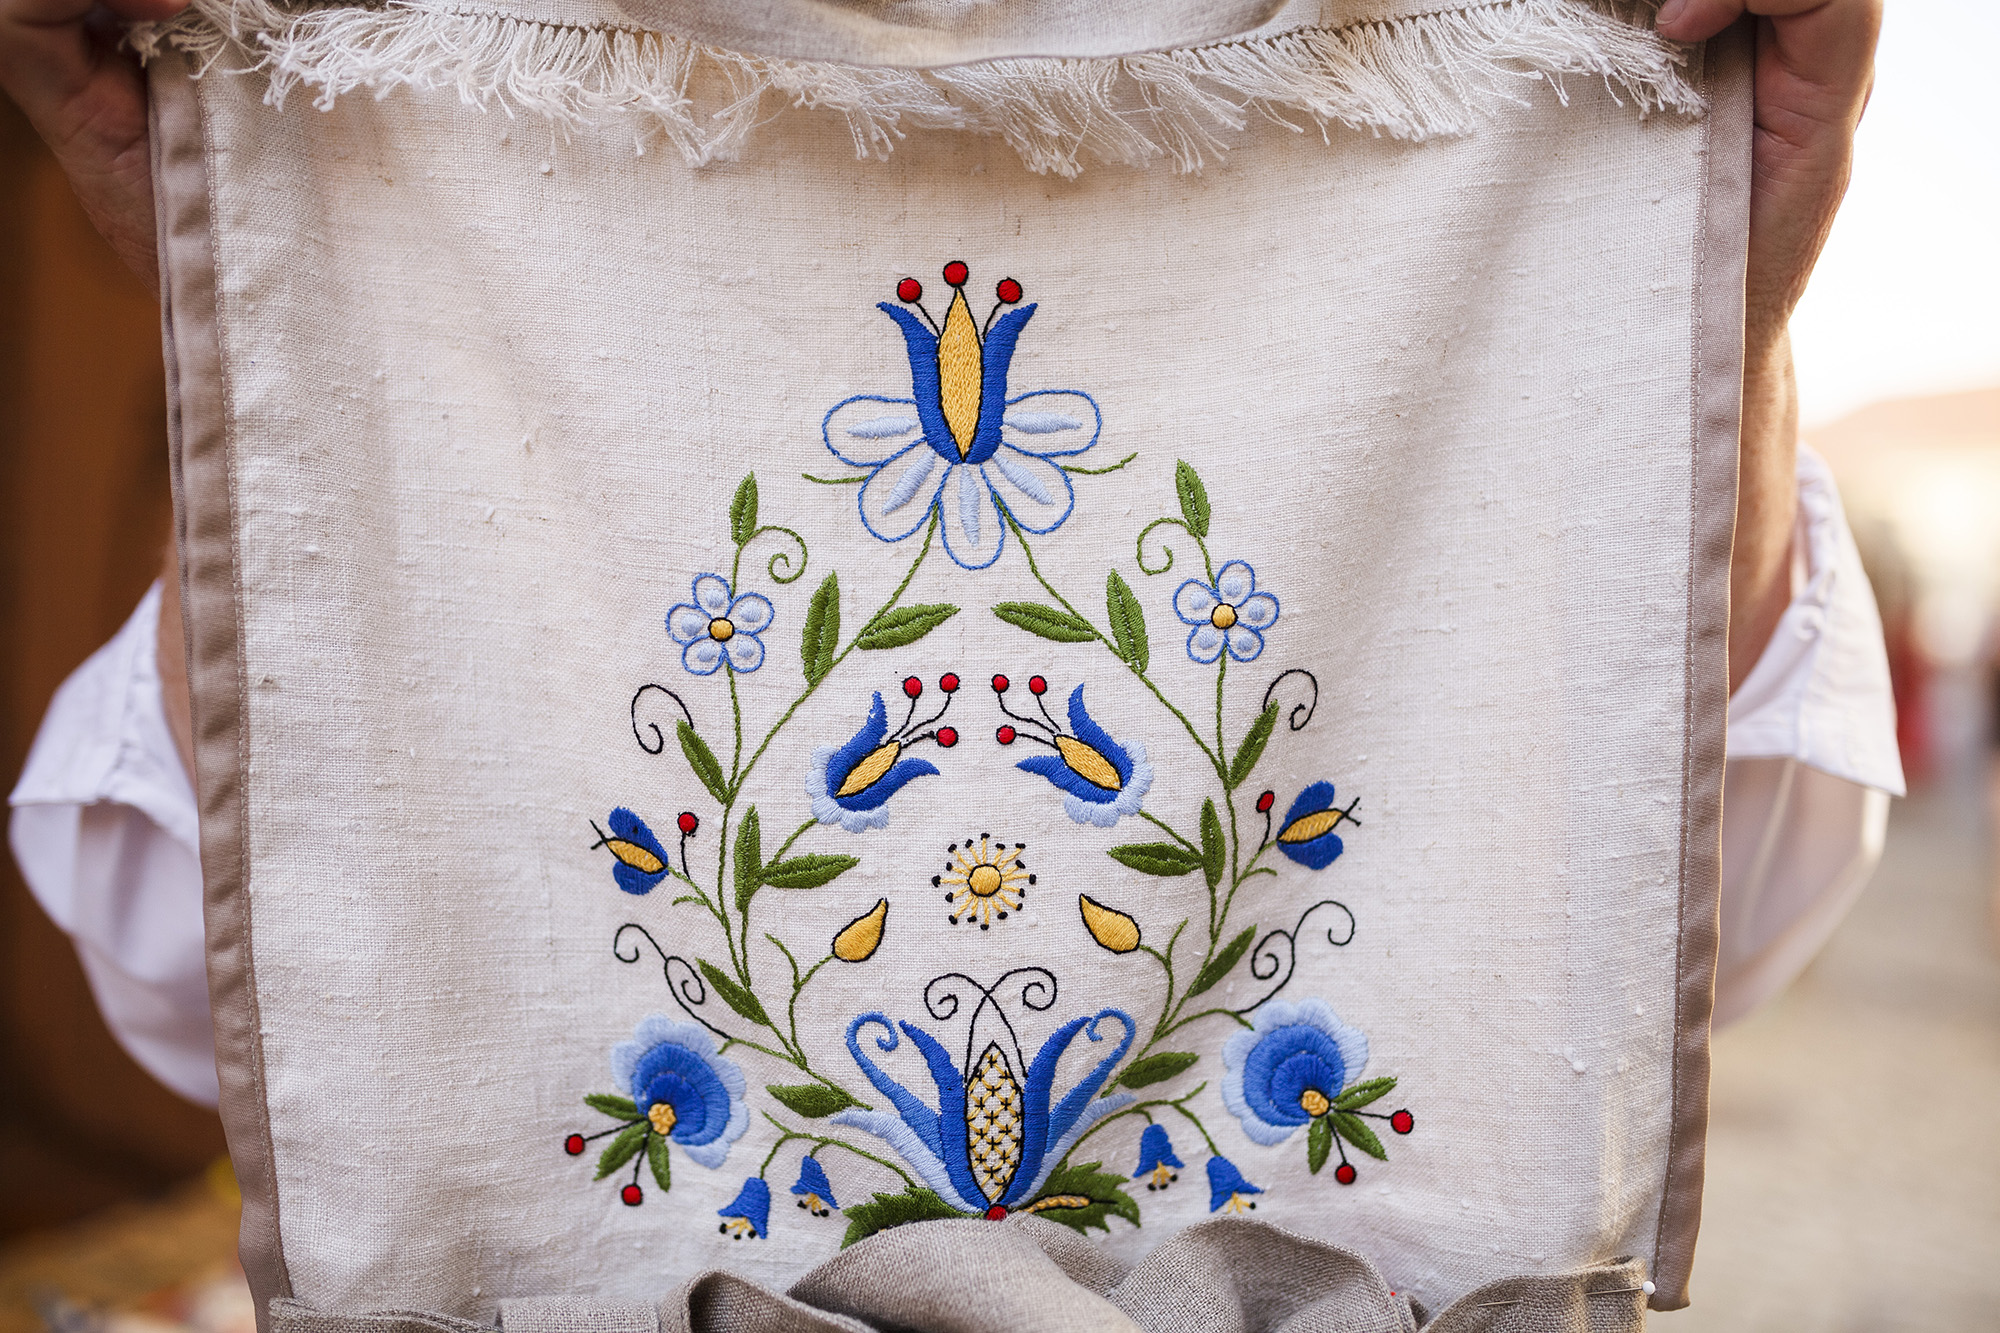 An embroidered linen table mat with a blue floral motif